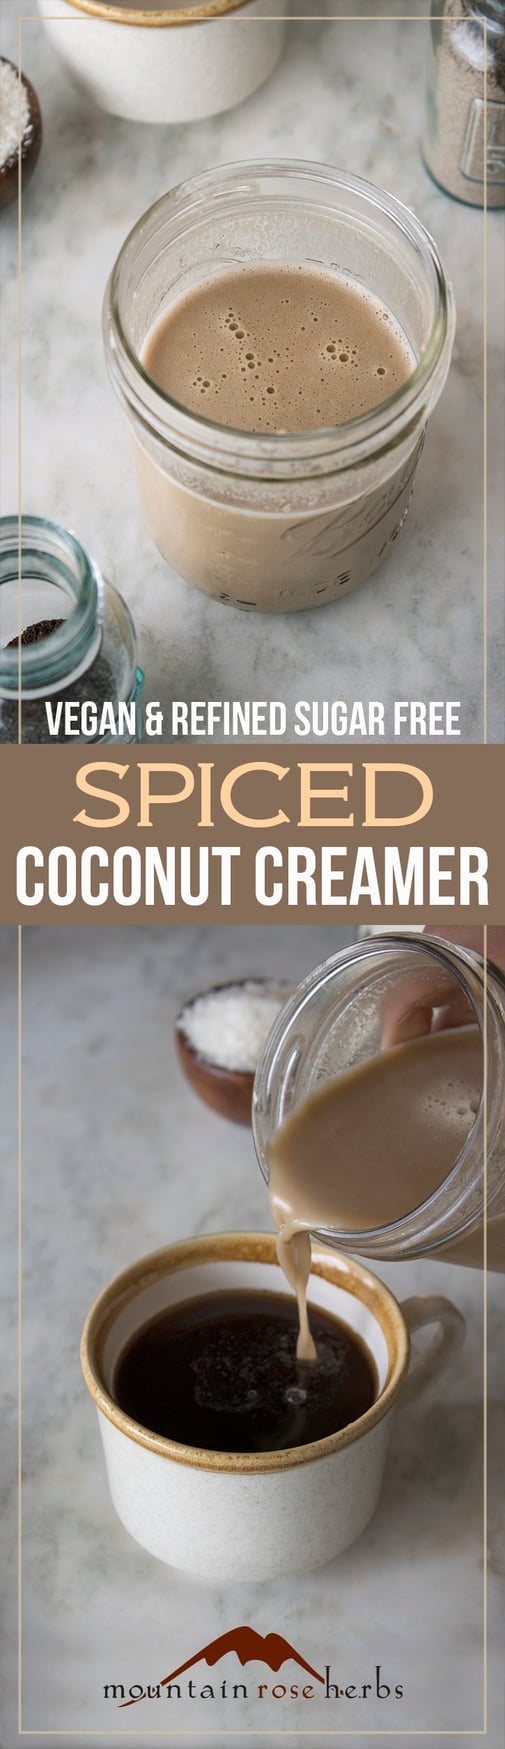 Coconut Creamer Recipe by Mountain Rose Herbs